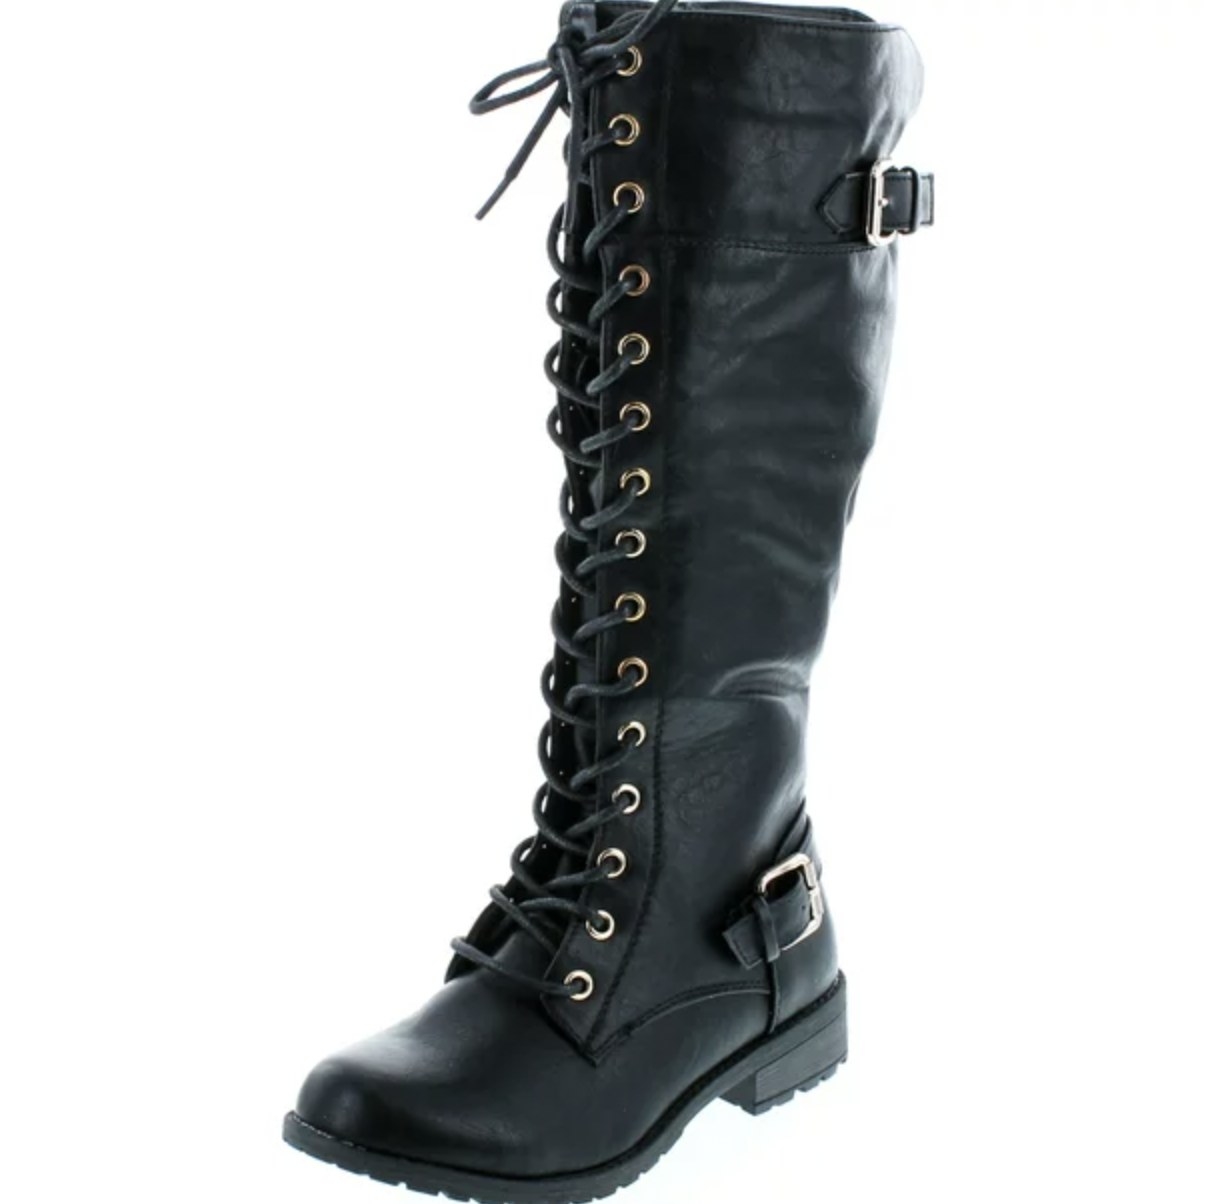 knee high lace up riding boots in black